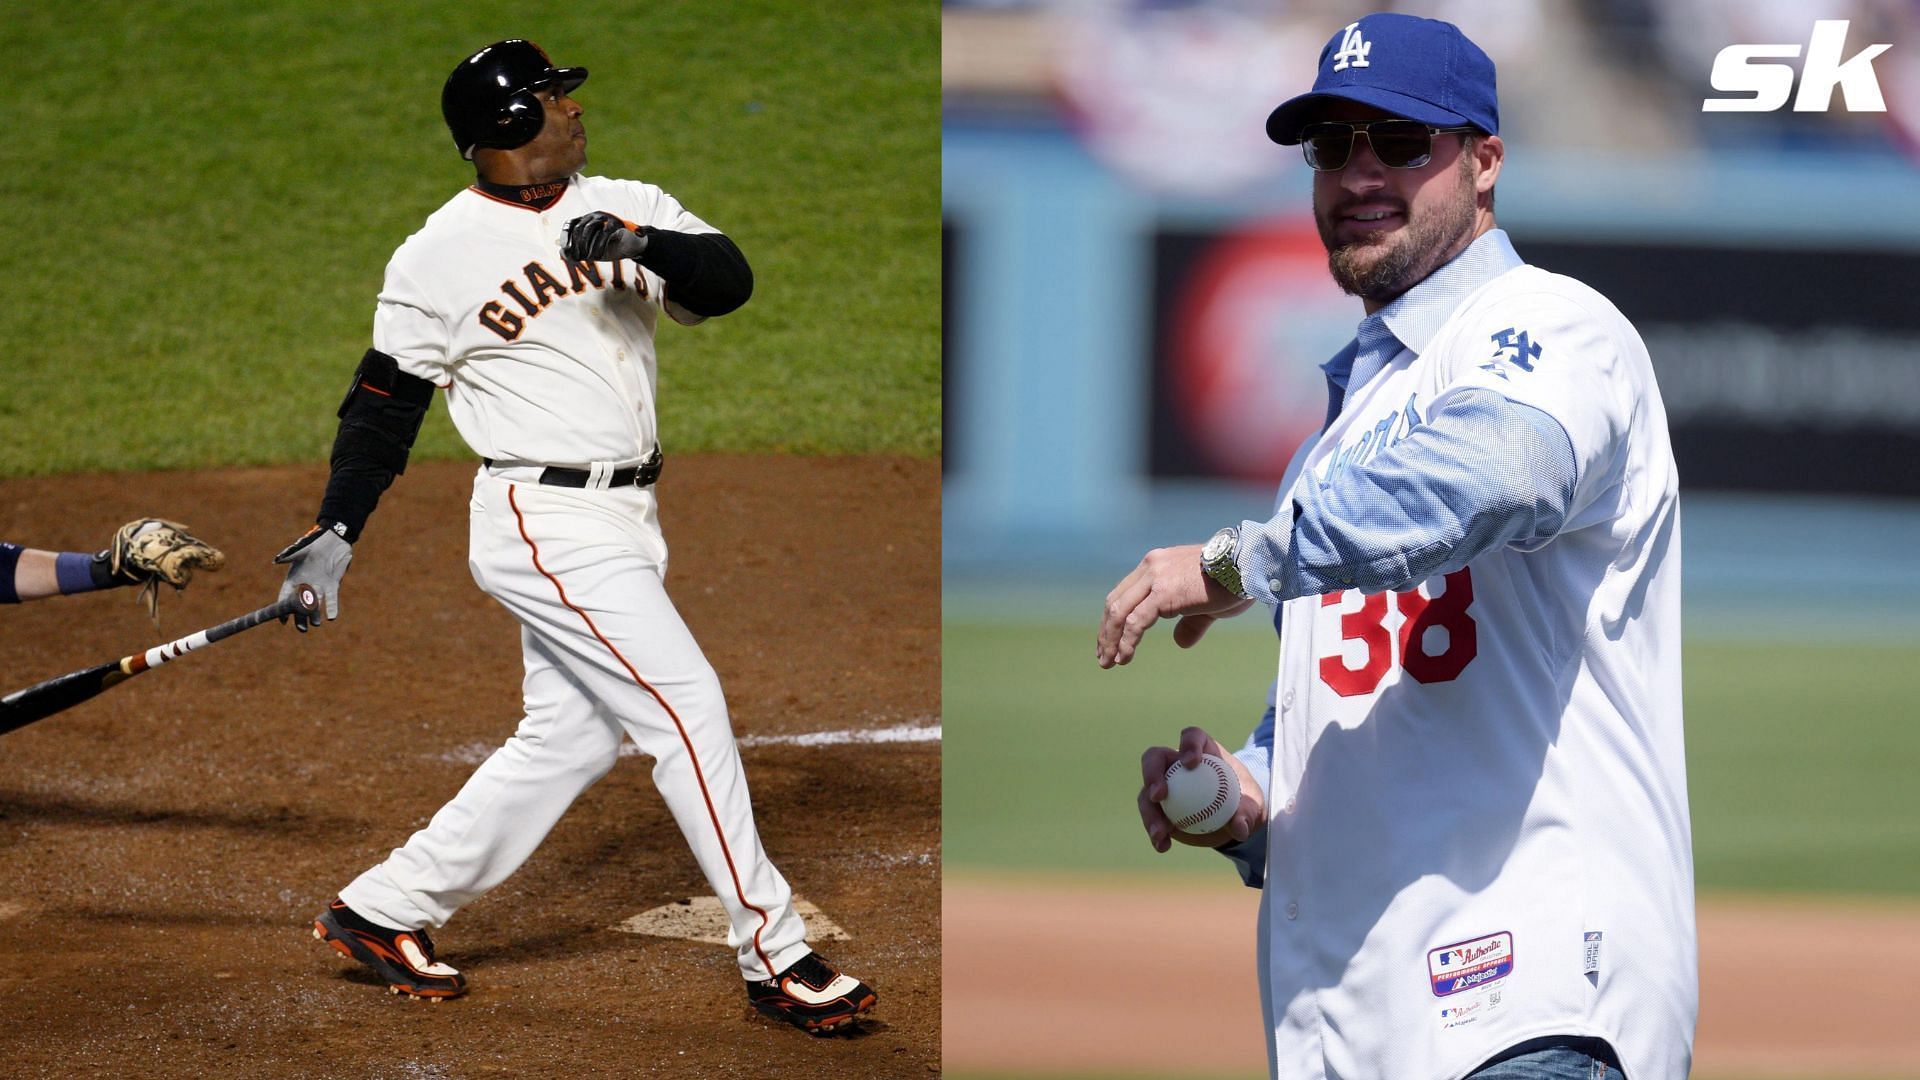 Eric Gagne once dubbed Barry Bonds as the greatest player in baseball history